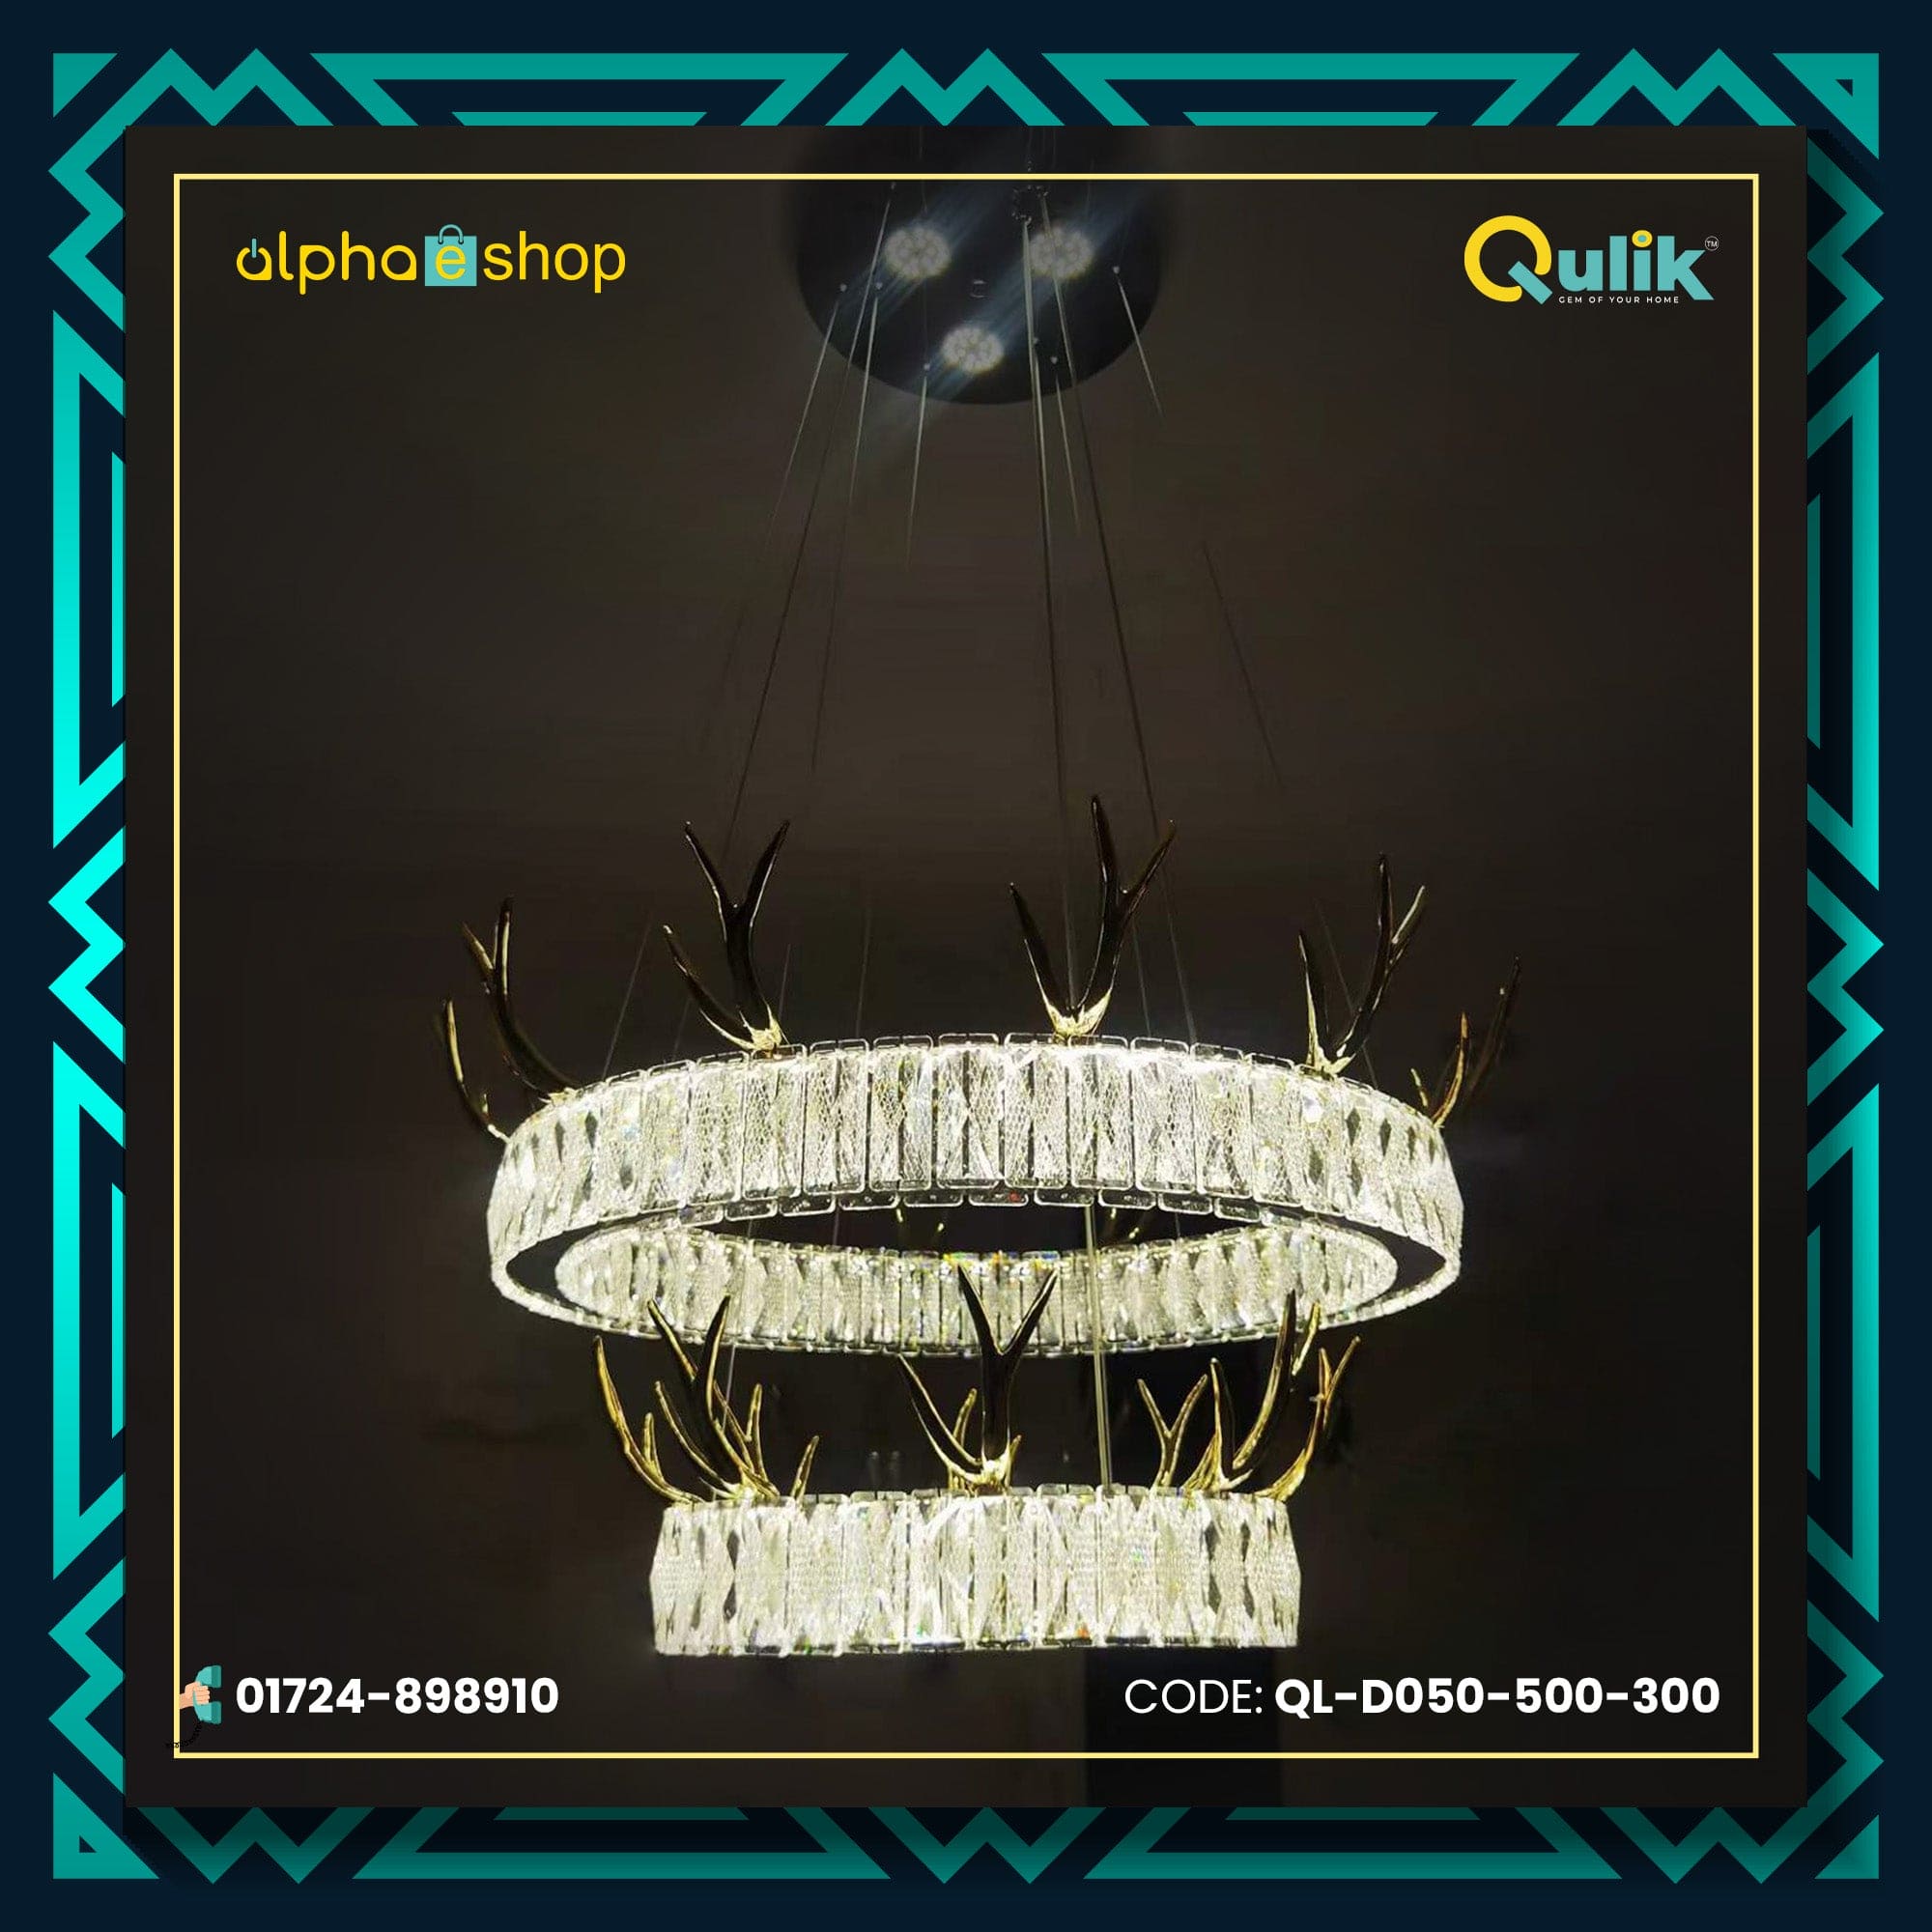 Qulik D050-500-300 LED Ceiling Light - Dual Ring Design, 60W Power, Adjustable Color Temperature. Ideal for living rooms, bedrooms, and dining areas.